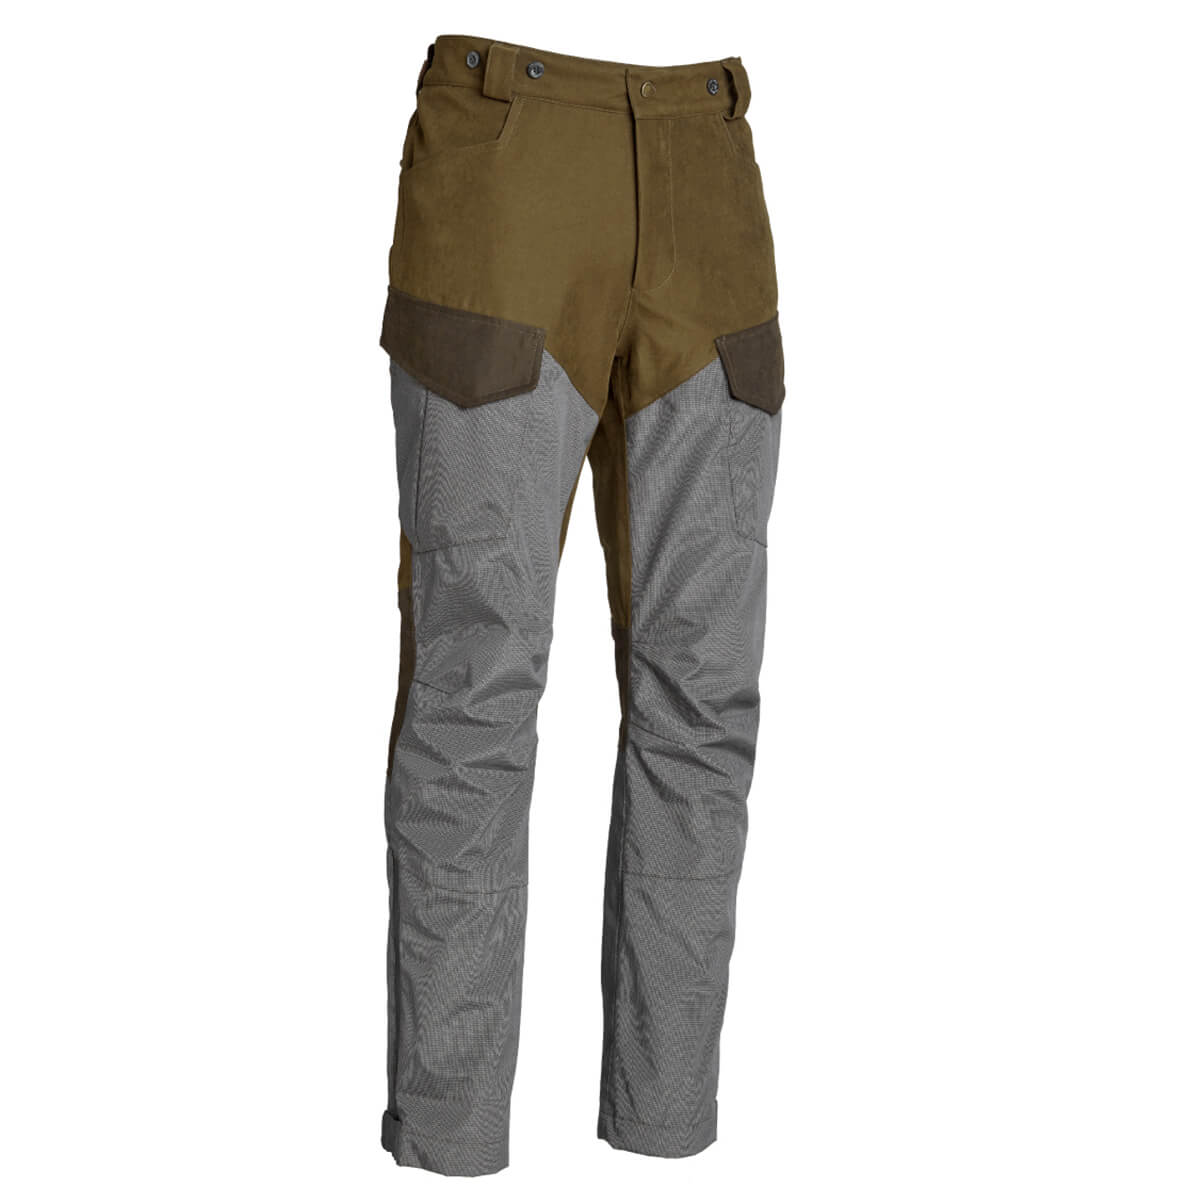 Northern Hunting trousers Geir Agnar - Hunting Trousers